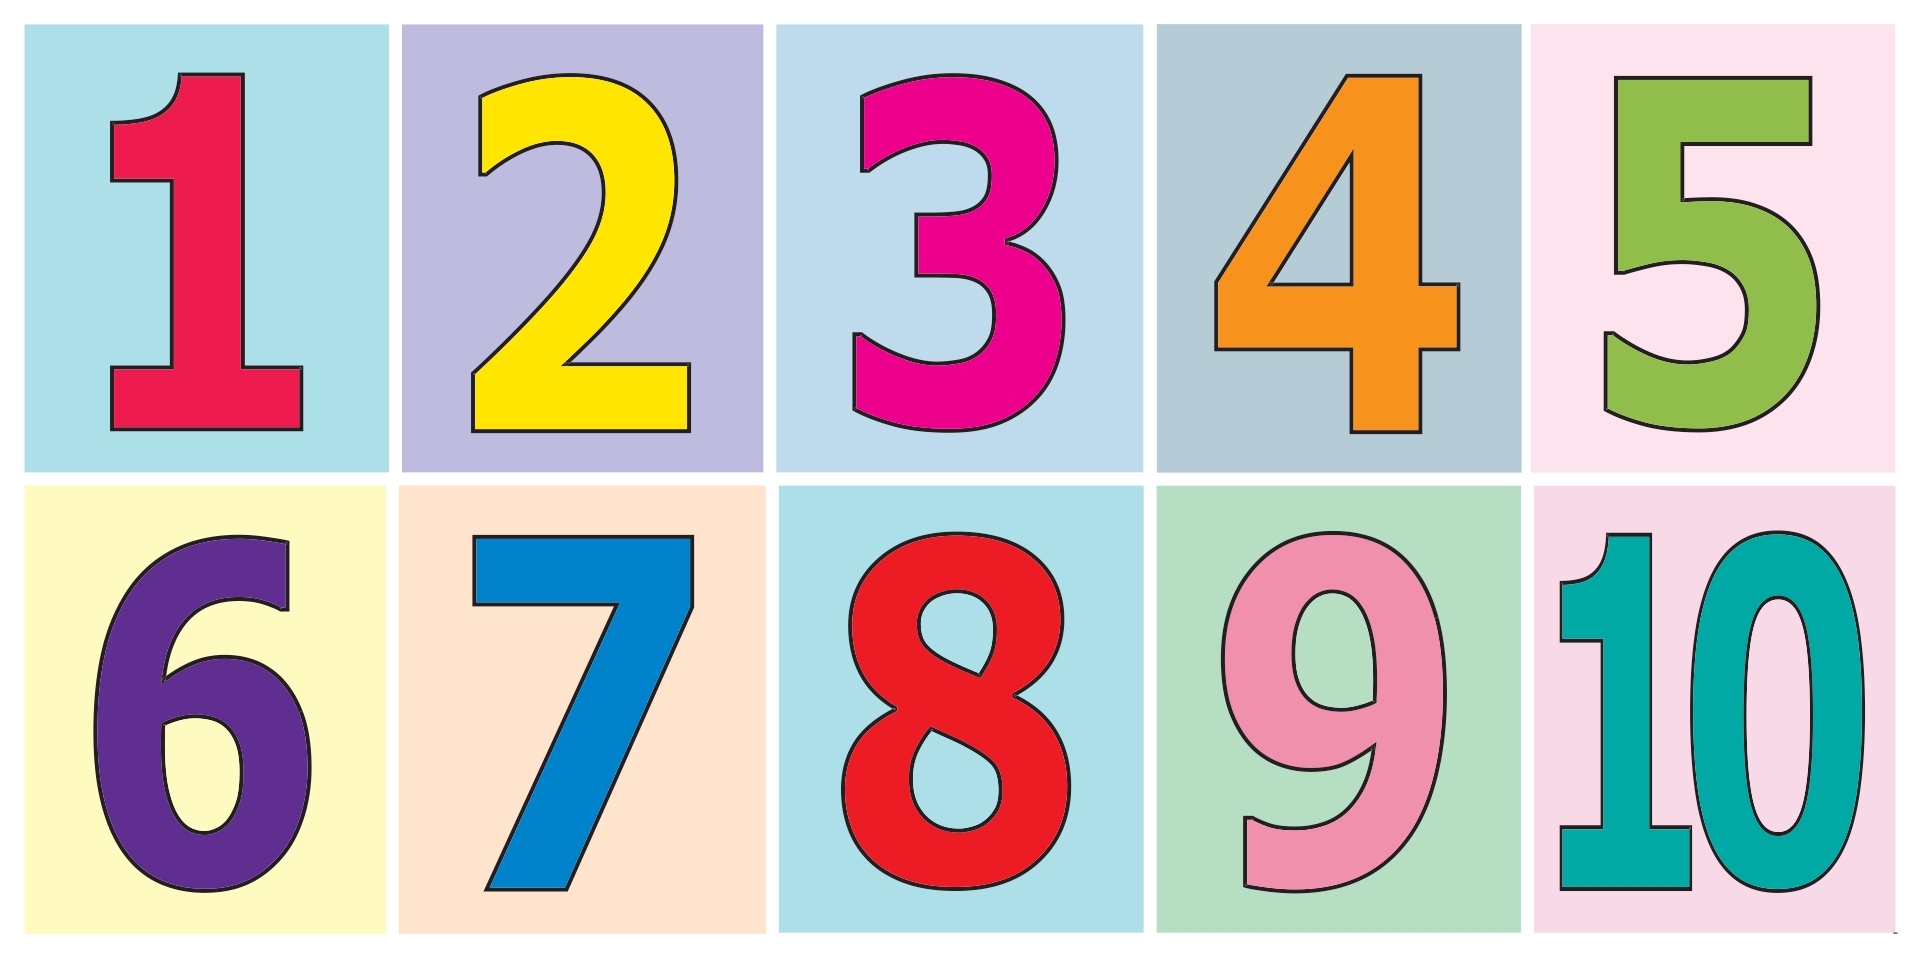 9 Best Images of Printable Numbers From 1 30 Printable Number Chart 1